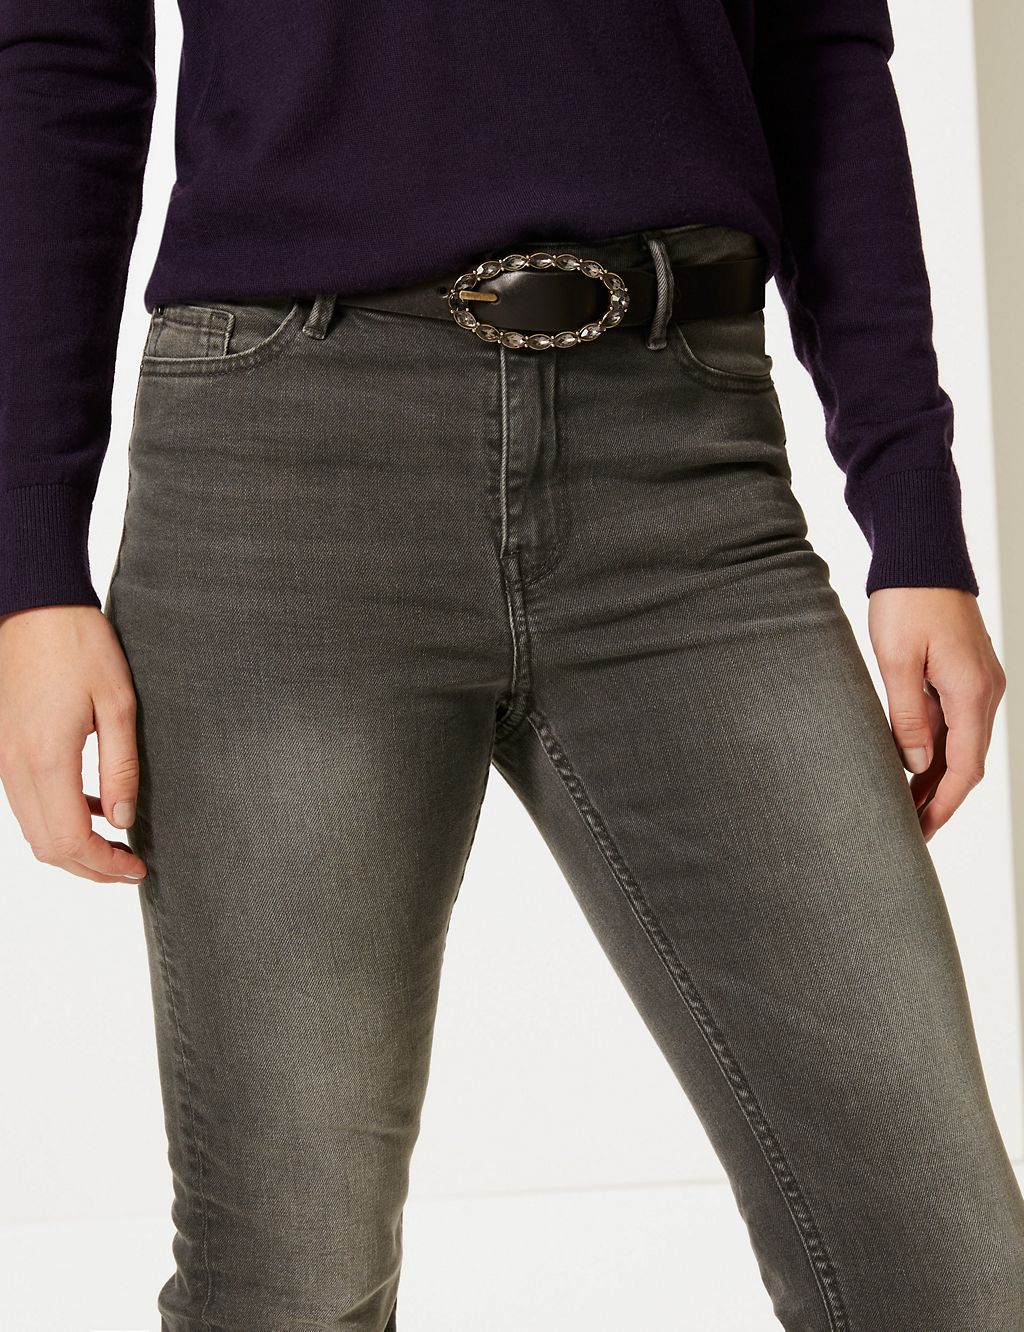 Faux Leather Jeans Hip Belt 3 of 3